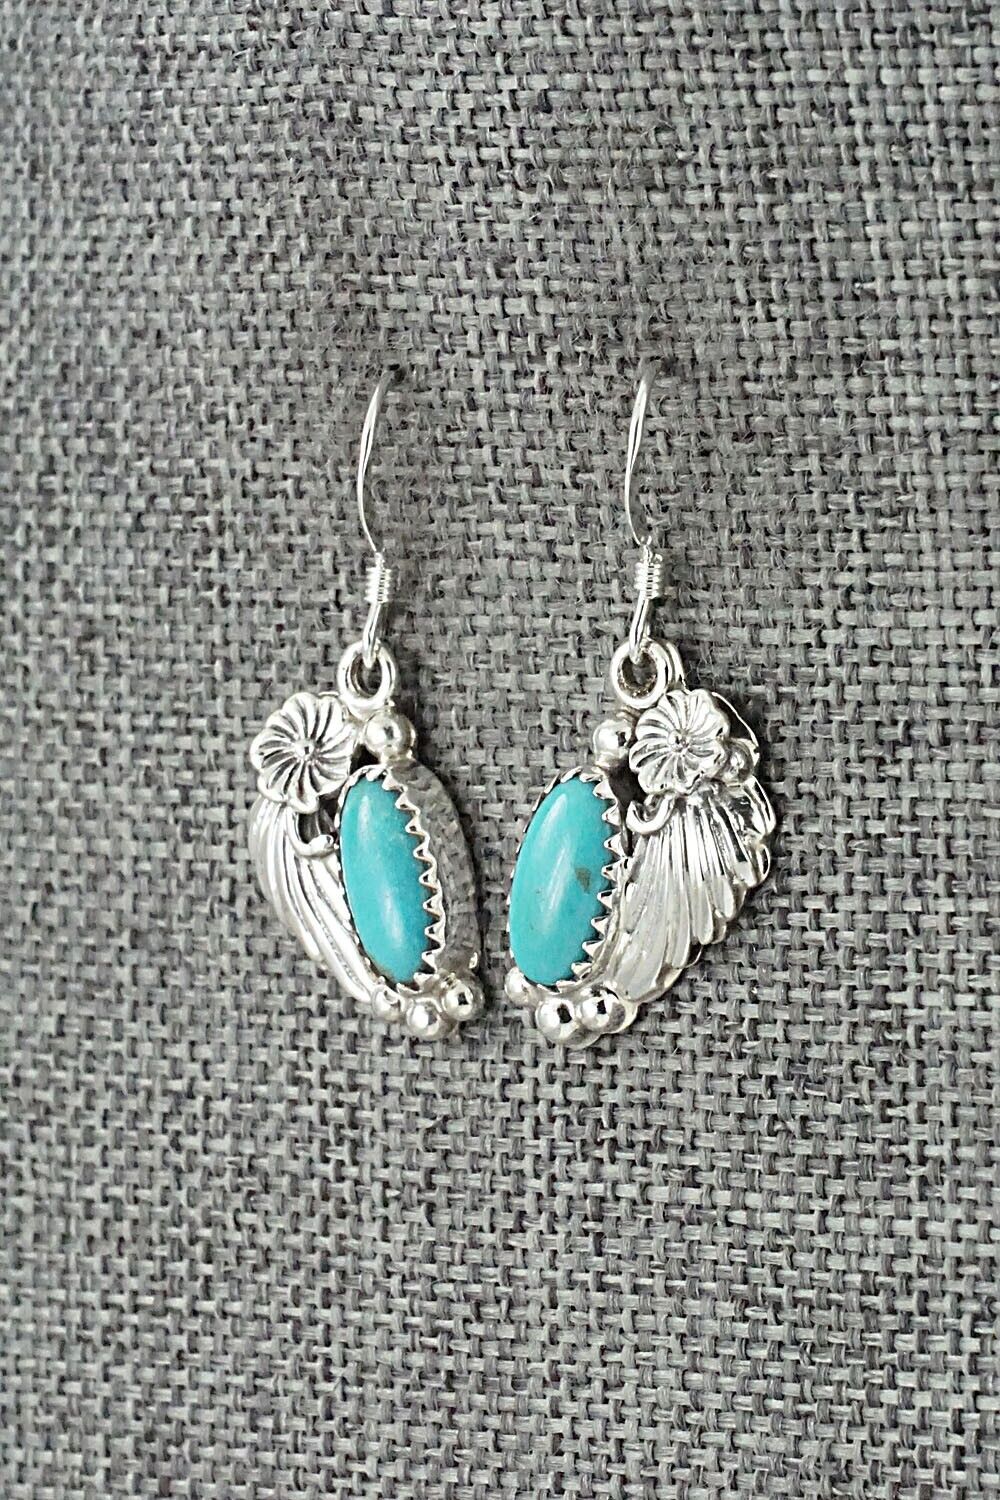 Turquoise and Sterling Silver Earrings - Andrew Vandever